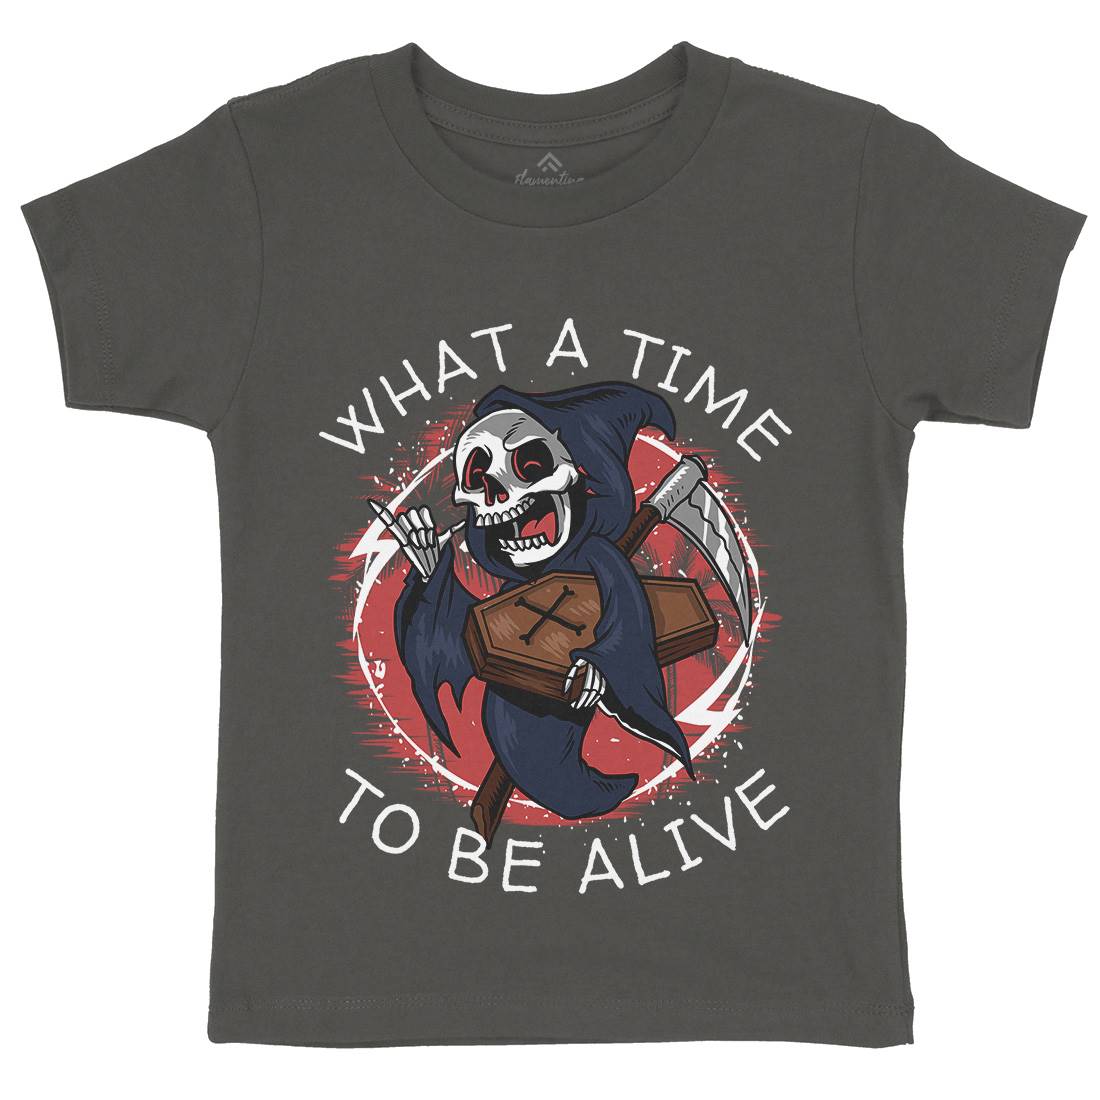 What A Time To Be Alive Kids Crew Neck T-Shirt Funny D096